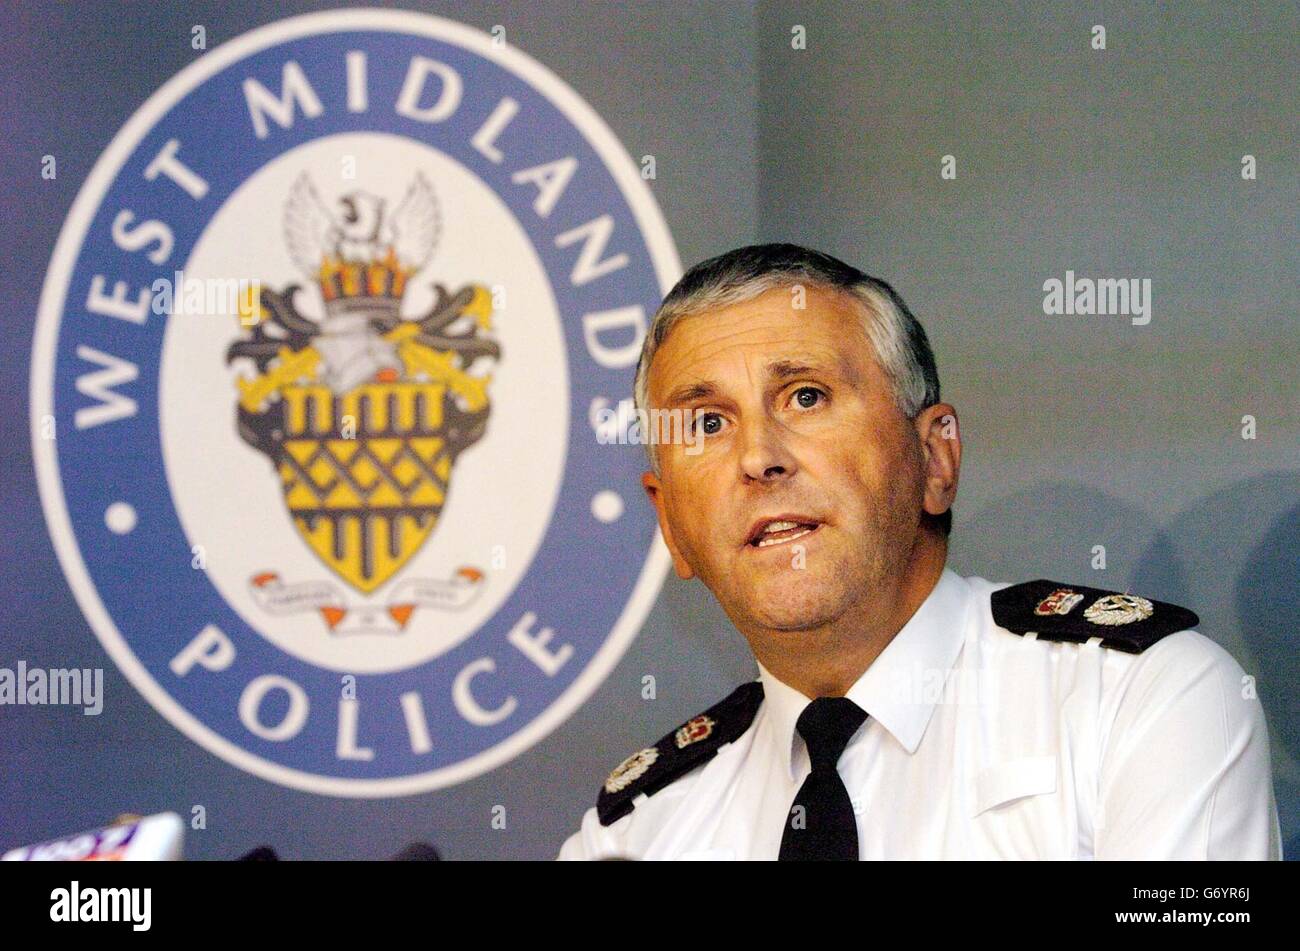 Paul Scott-Lee, Chief Constable of the West Midlands makes a statement on the stabbing and death of Detective Constable Michael Swindells in Nechells, Birmingham. Mr Scott-Lee was speaking during a press conference at Police headquarters in central Birmingham. Stock Photo